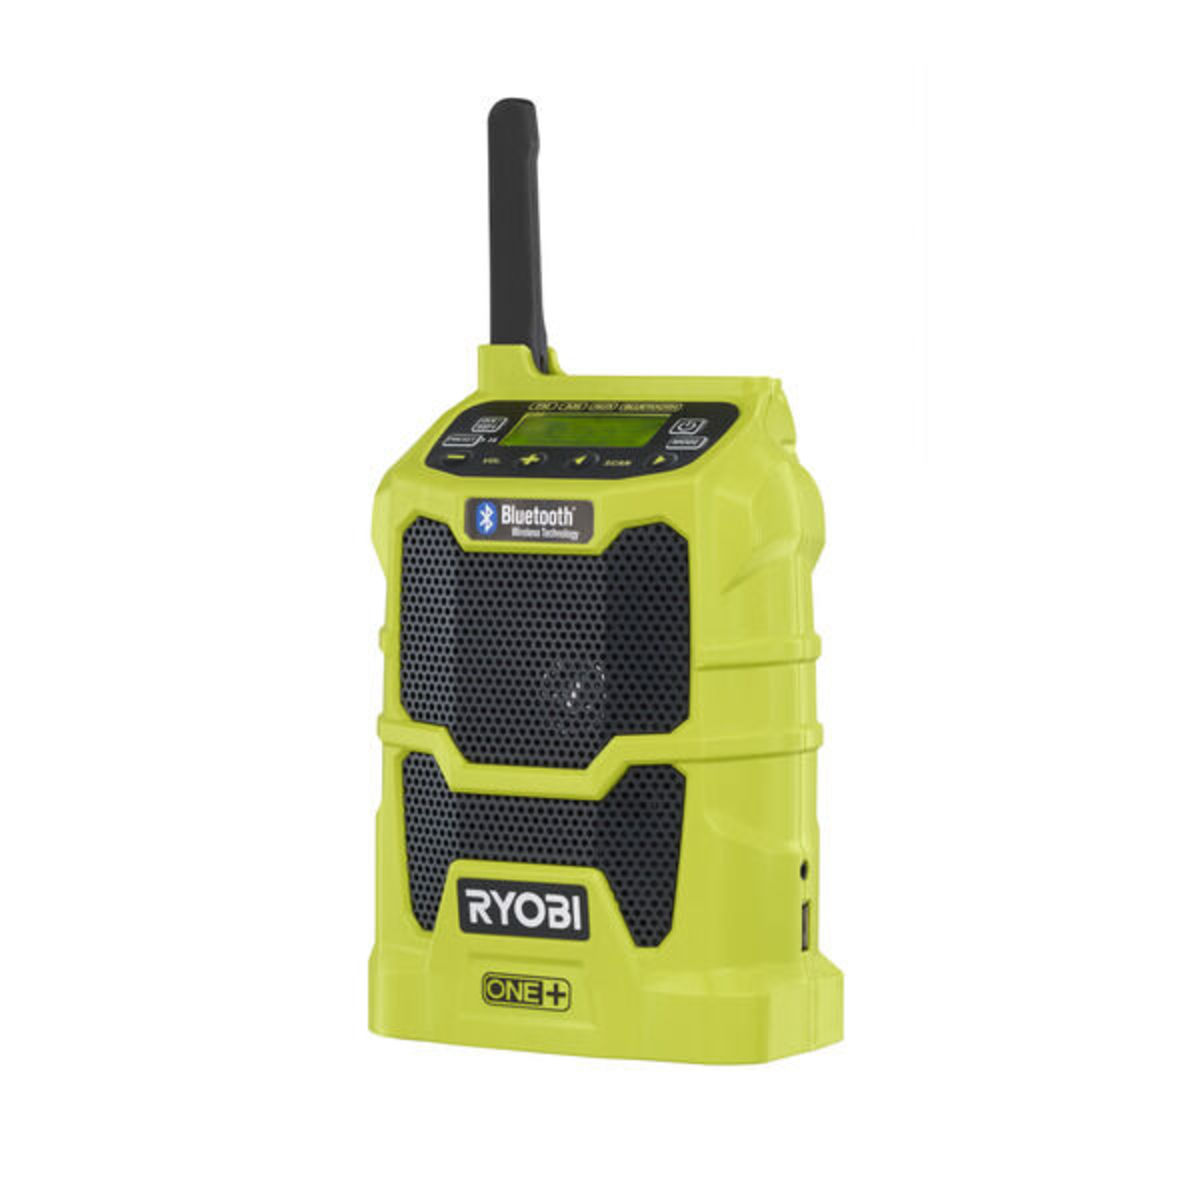 5-affordable-ryobi-cordless-power-tools-that-make-great-gifts